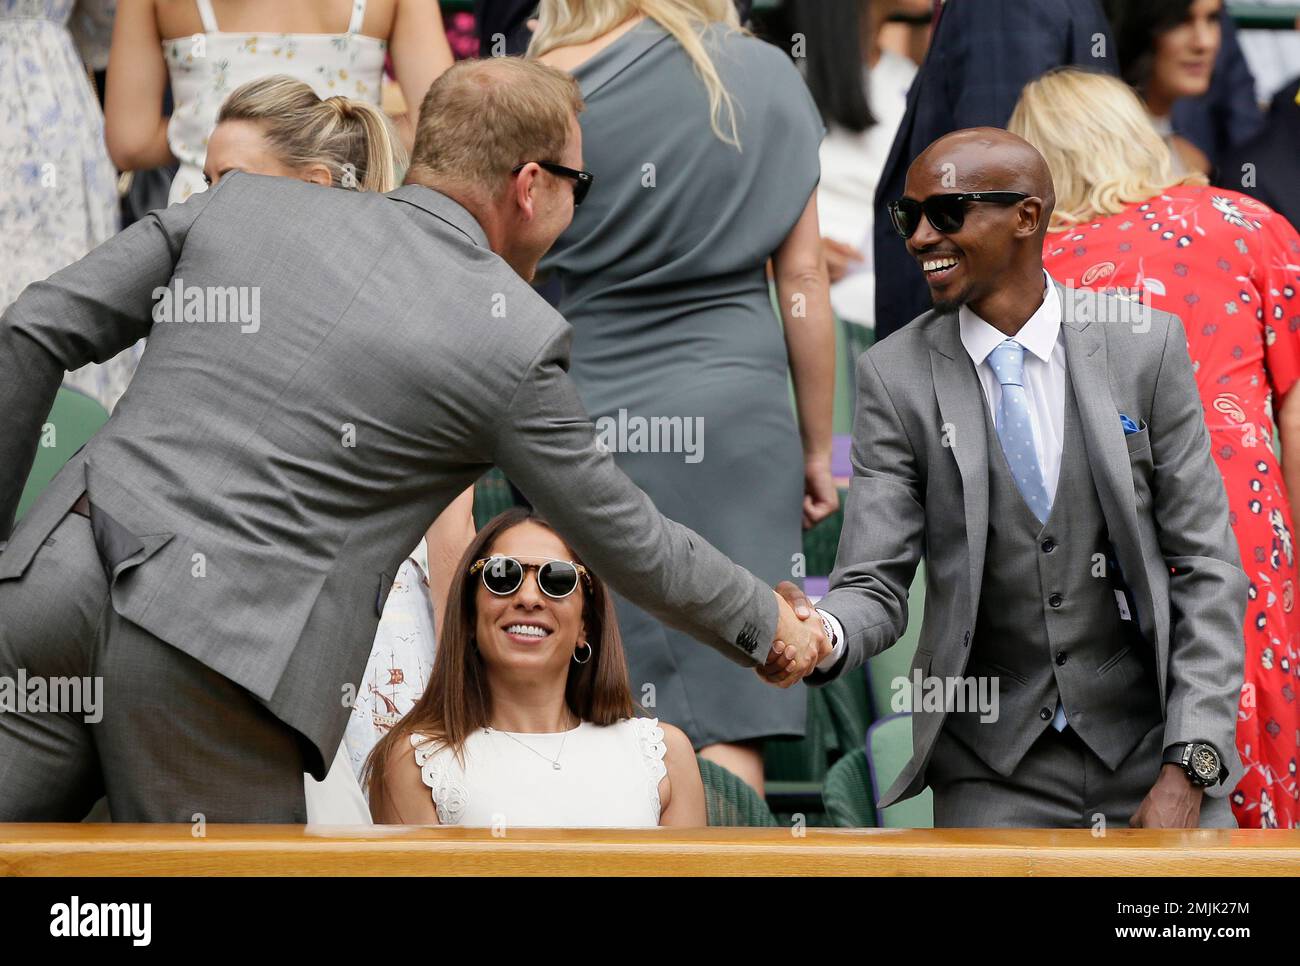 athlete-sir-mo-farah-right-shakes-hands-with-former-cyclist-sir-chris-hoy-as-they-arrive-in-the-royal-box-on-centre-court-during-day-six-of-the-wimbledon-tennis-championships-in-london-saturday-july-6-2019-ap-phototim-ireland-2MJK27M.jpg